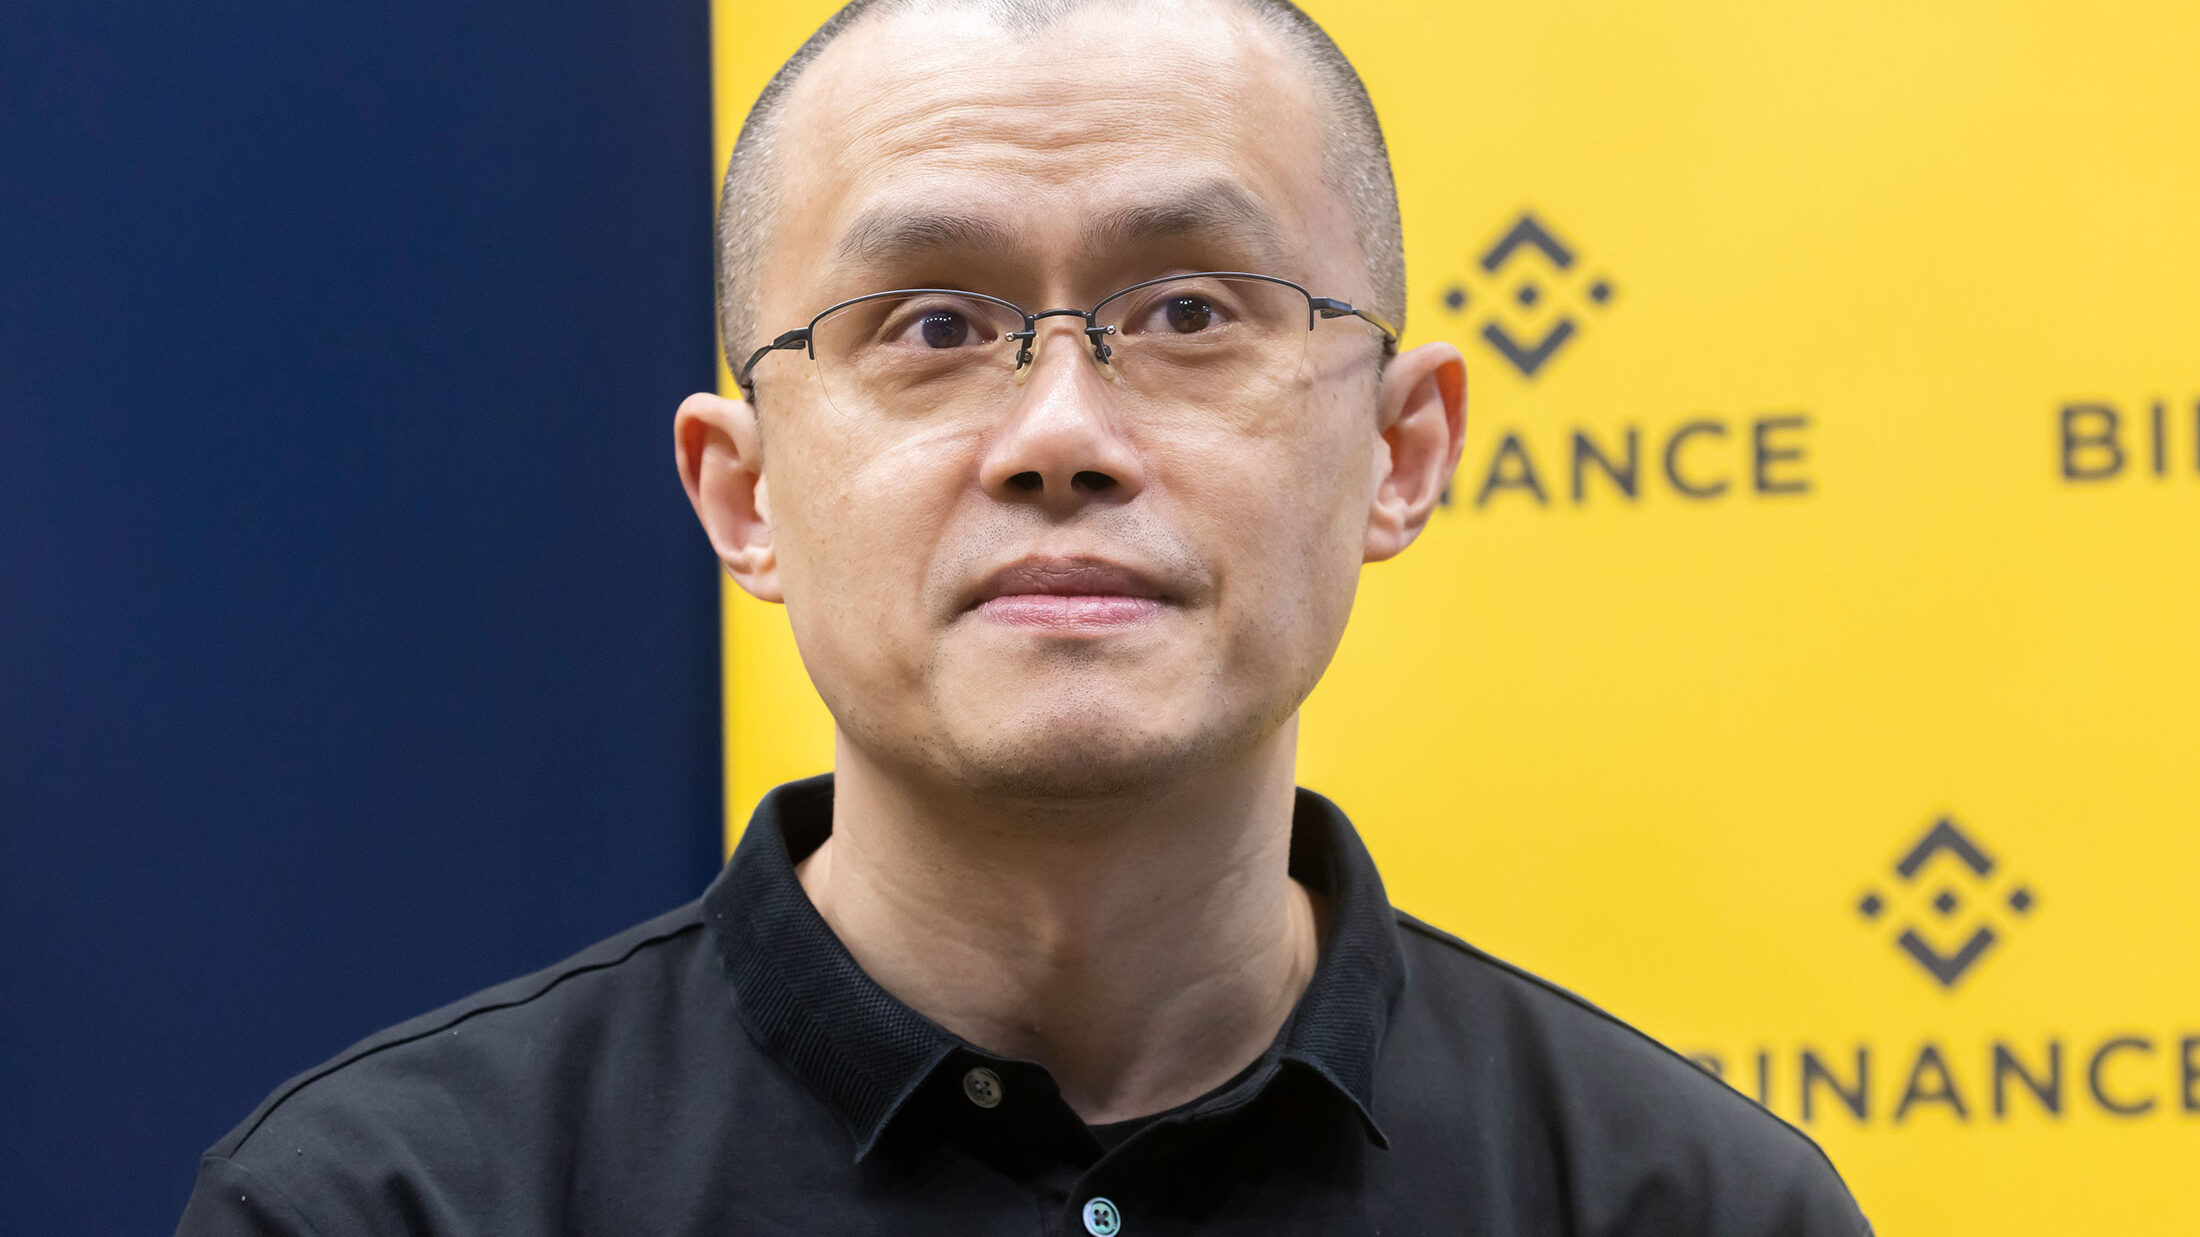 Binance Changpeng Zhao Reveals Seamless CommEx Transition Amid Emerging Questions